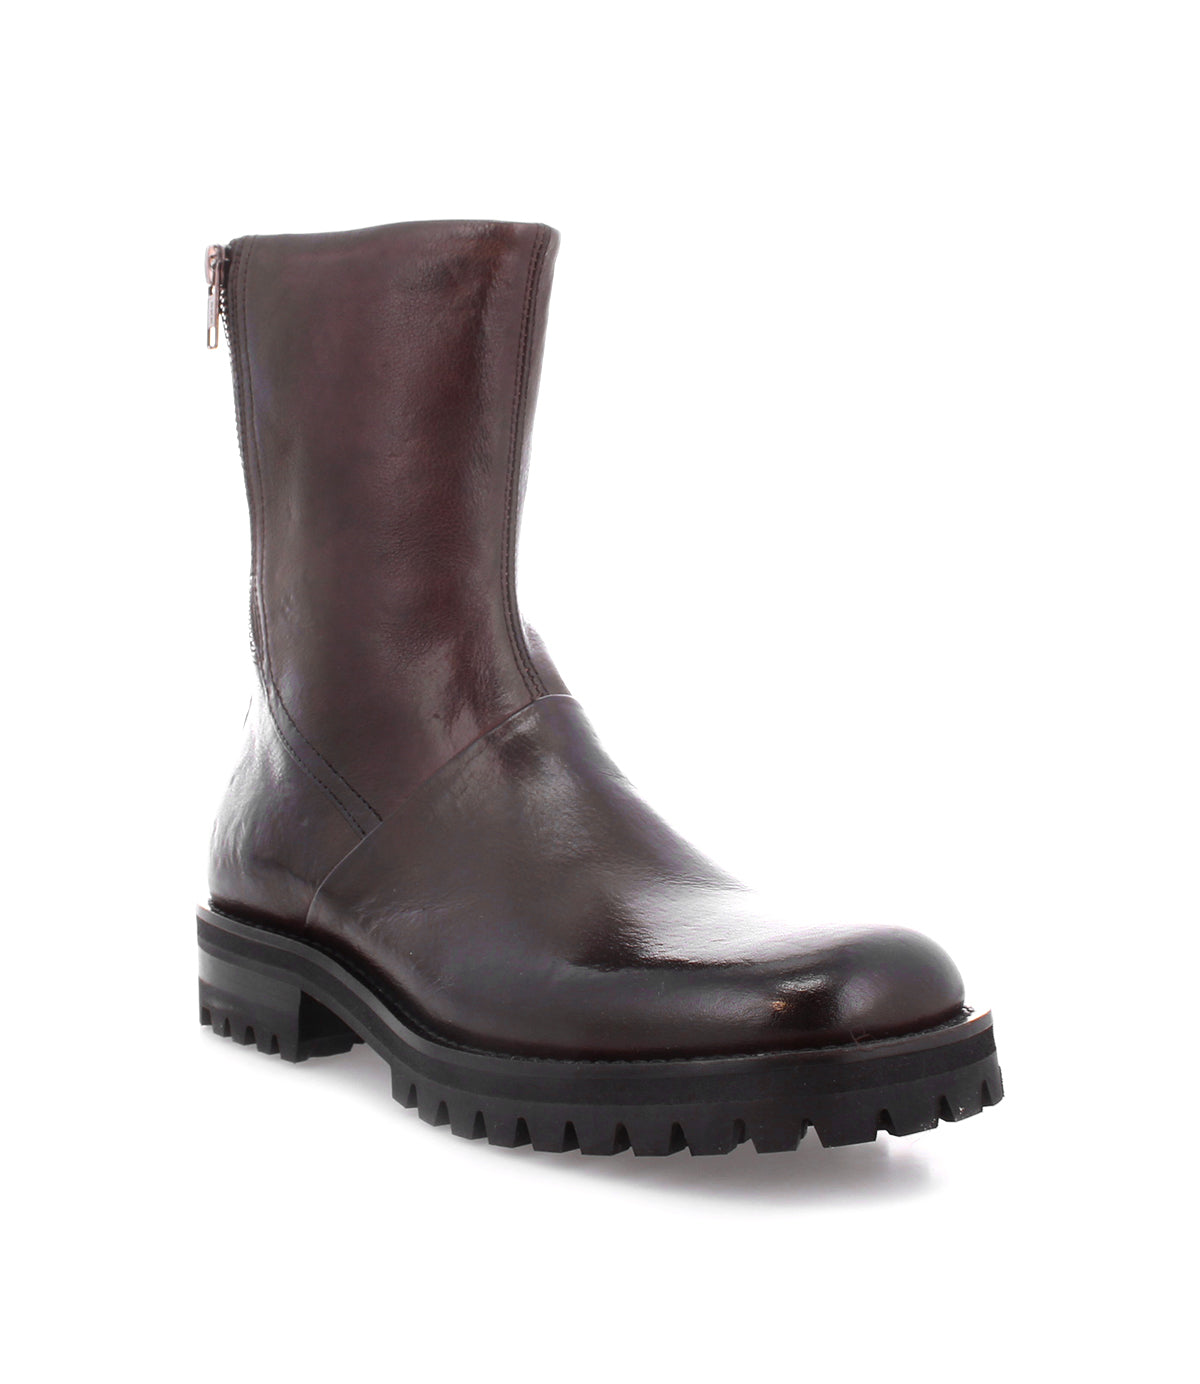 Men's Bed Stu Italian leather ankle boots, known for their durability and convenience.